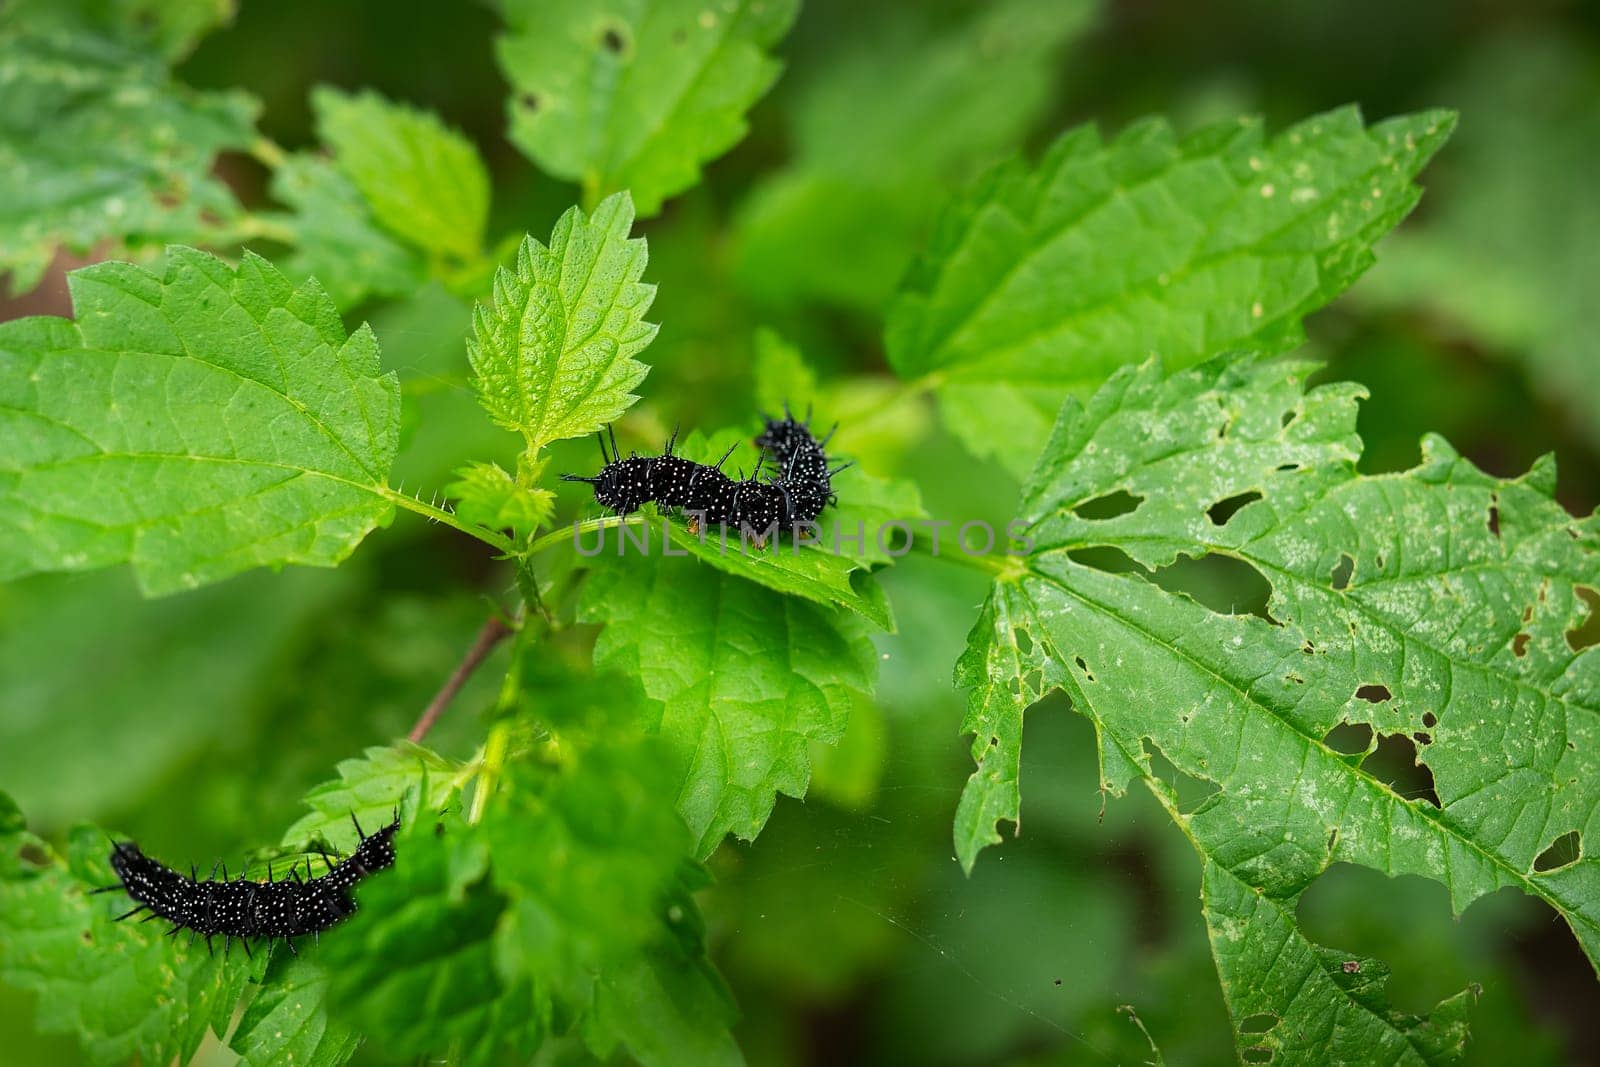 Two black caterpillars on vibrant green leaves, showcasing a natural, serene environment